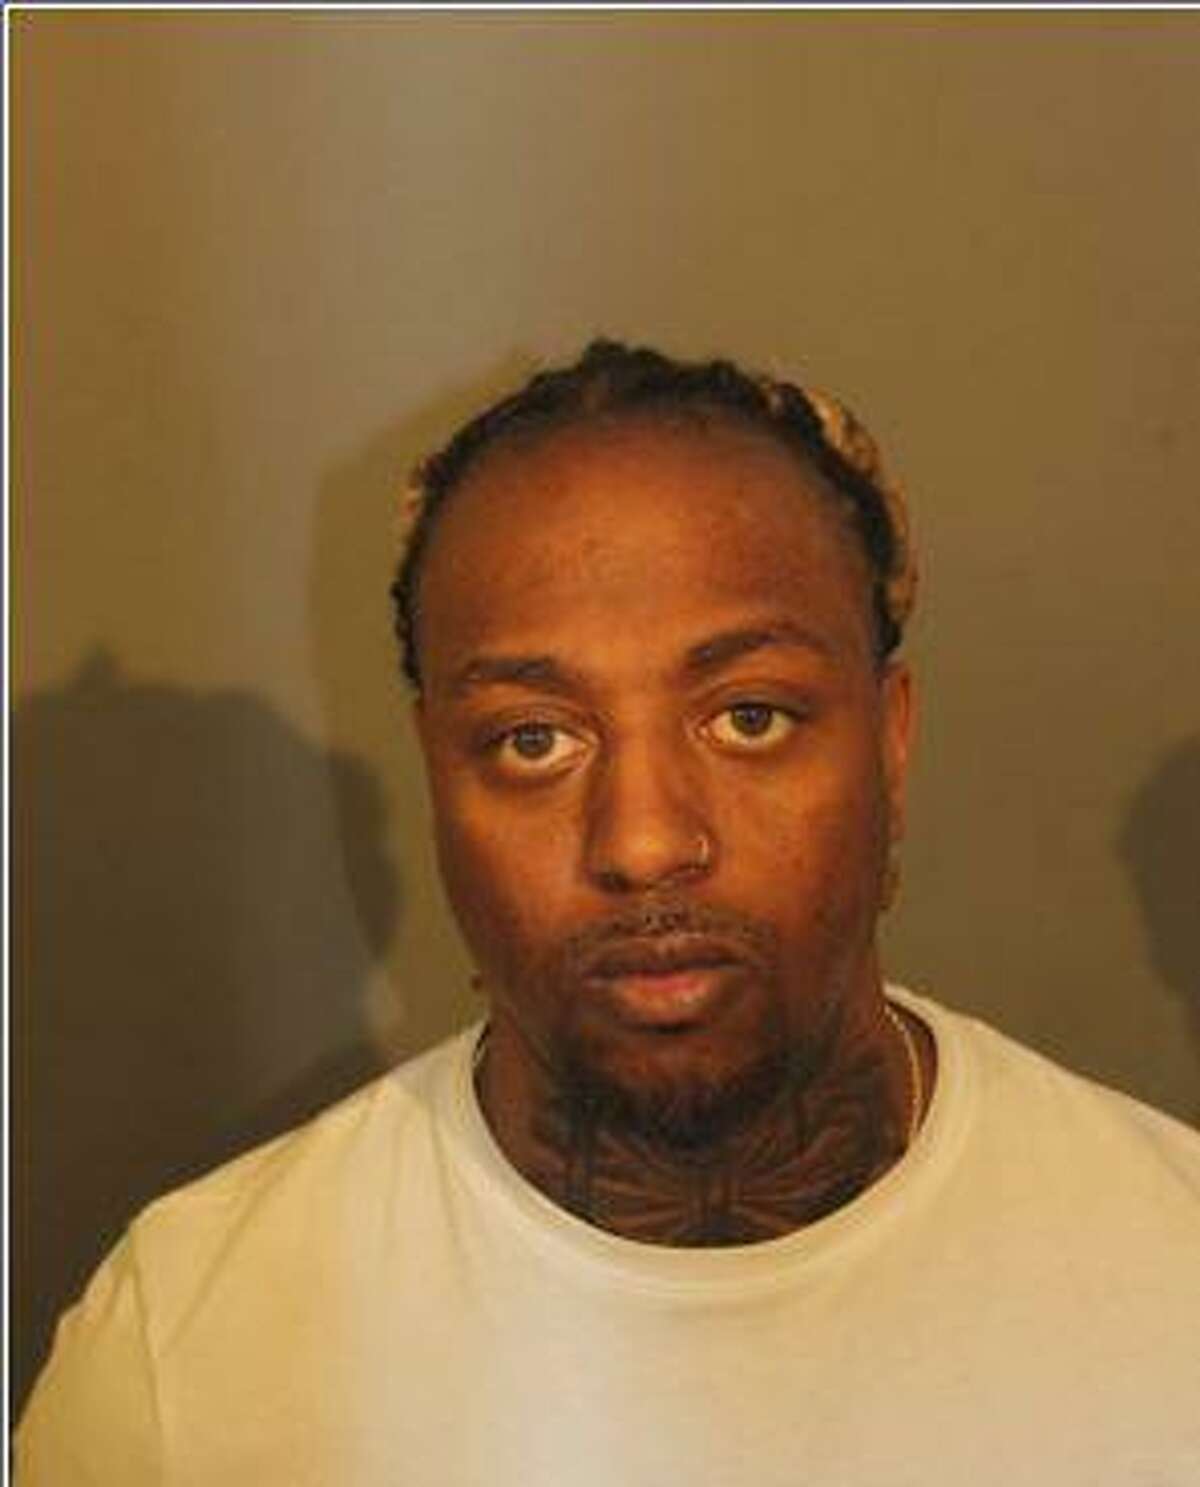 Two Danbury men were arrested Monday after allegedly being caught with drugs and a handgun, according to police. Here, Taurean Coleman.